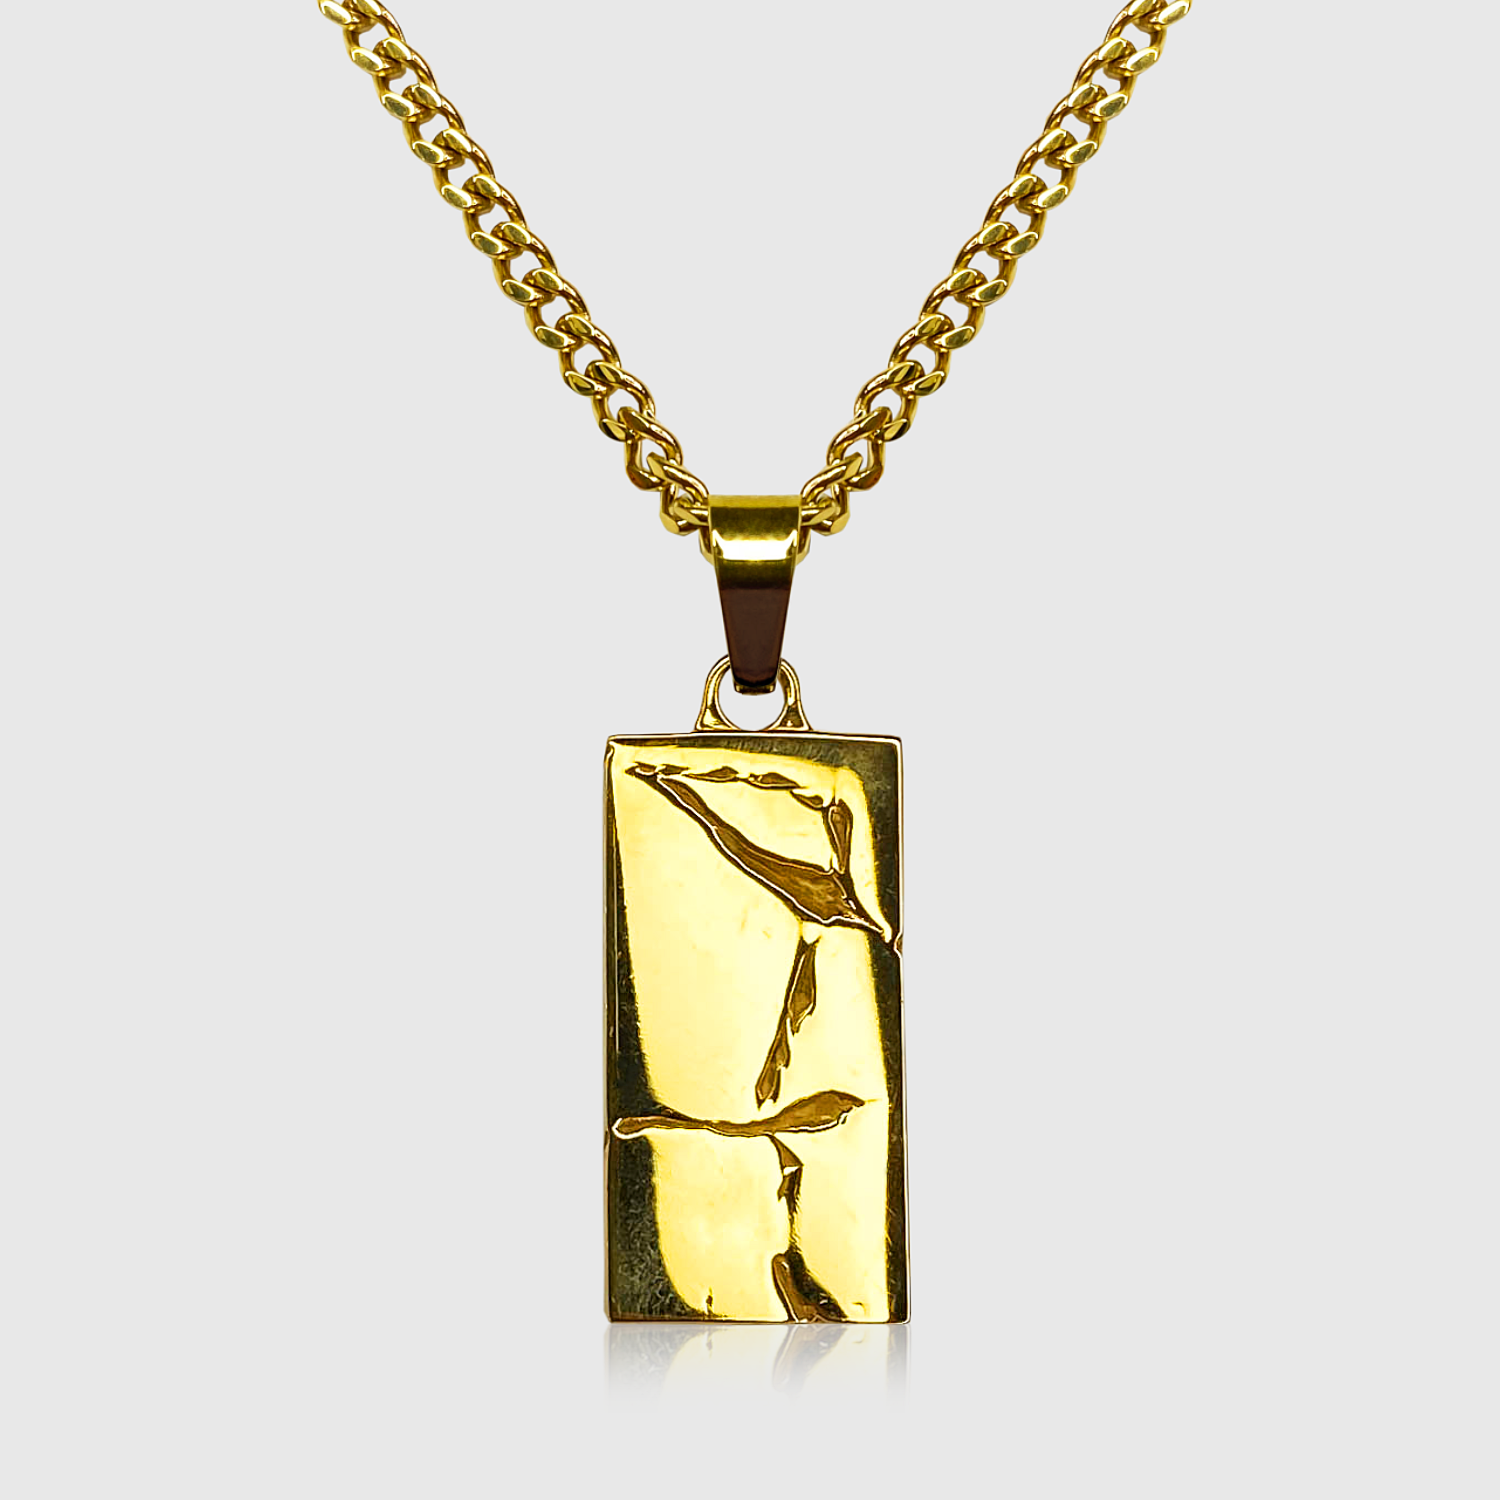 Cracked Plate Pendant (Gold)